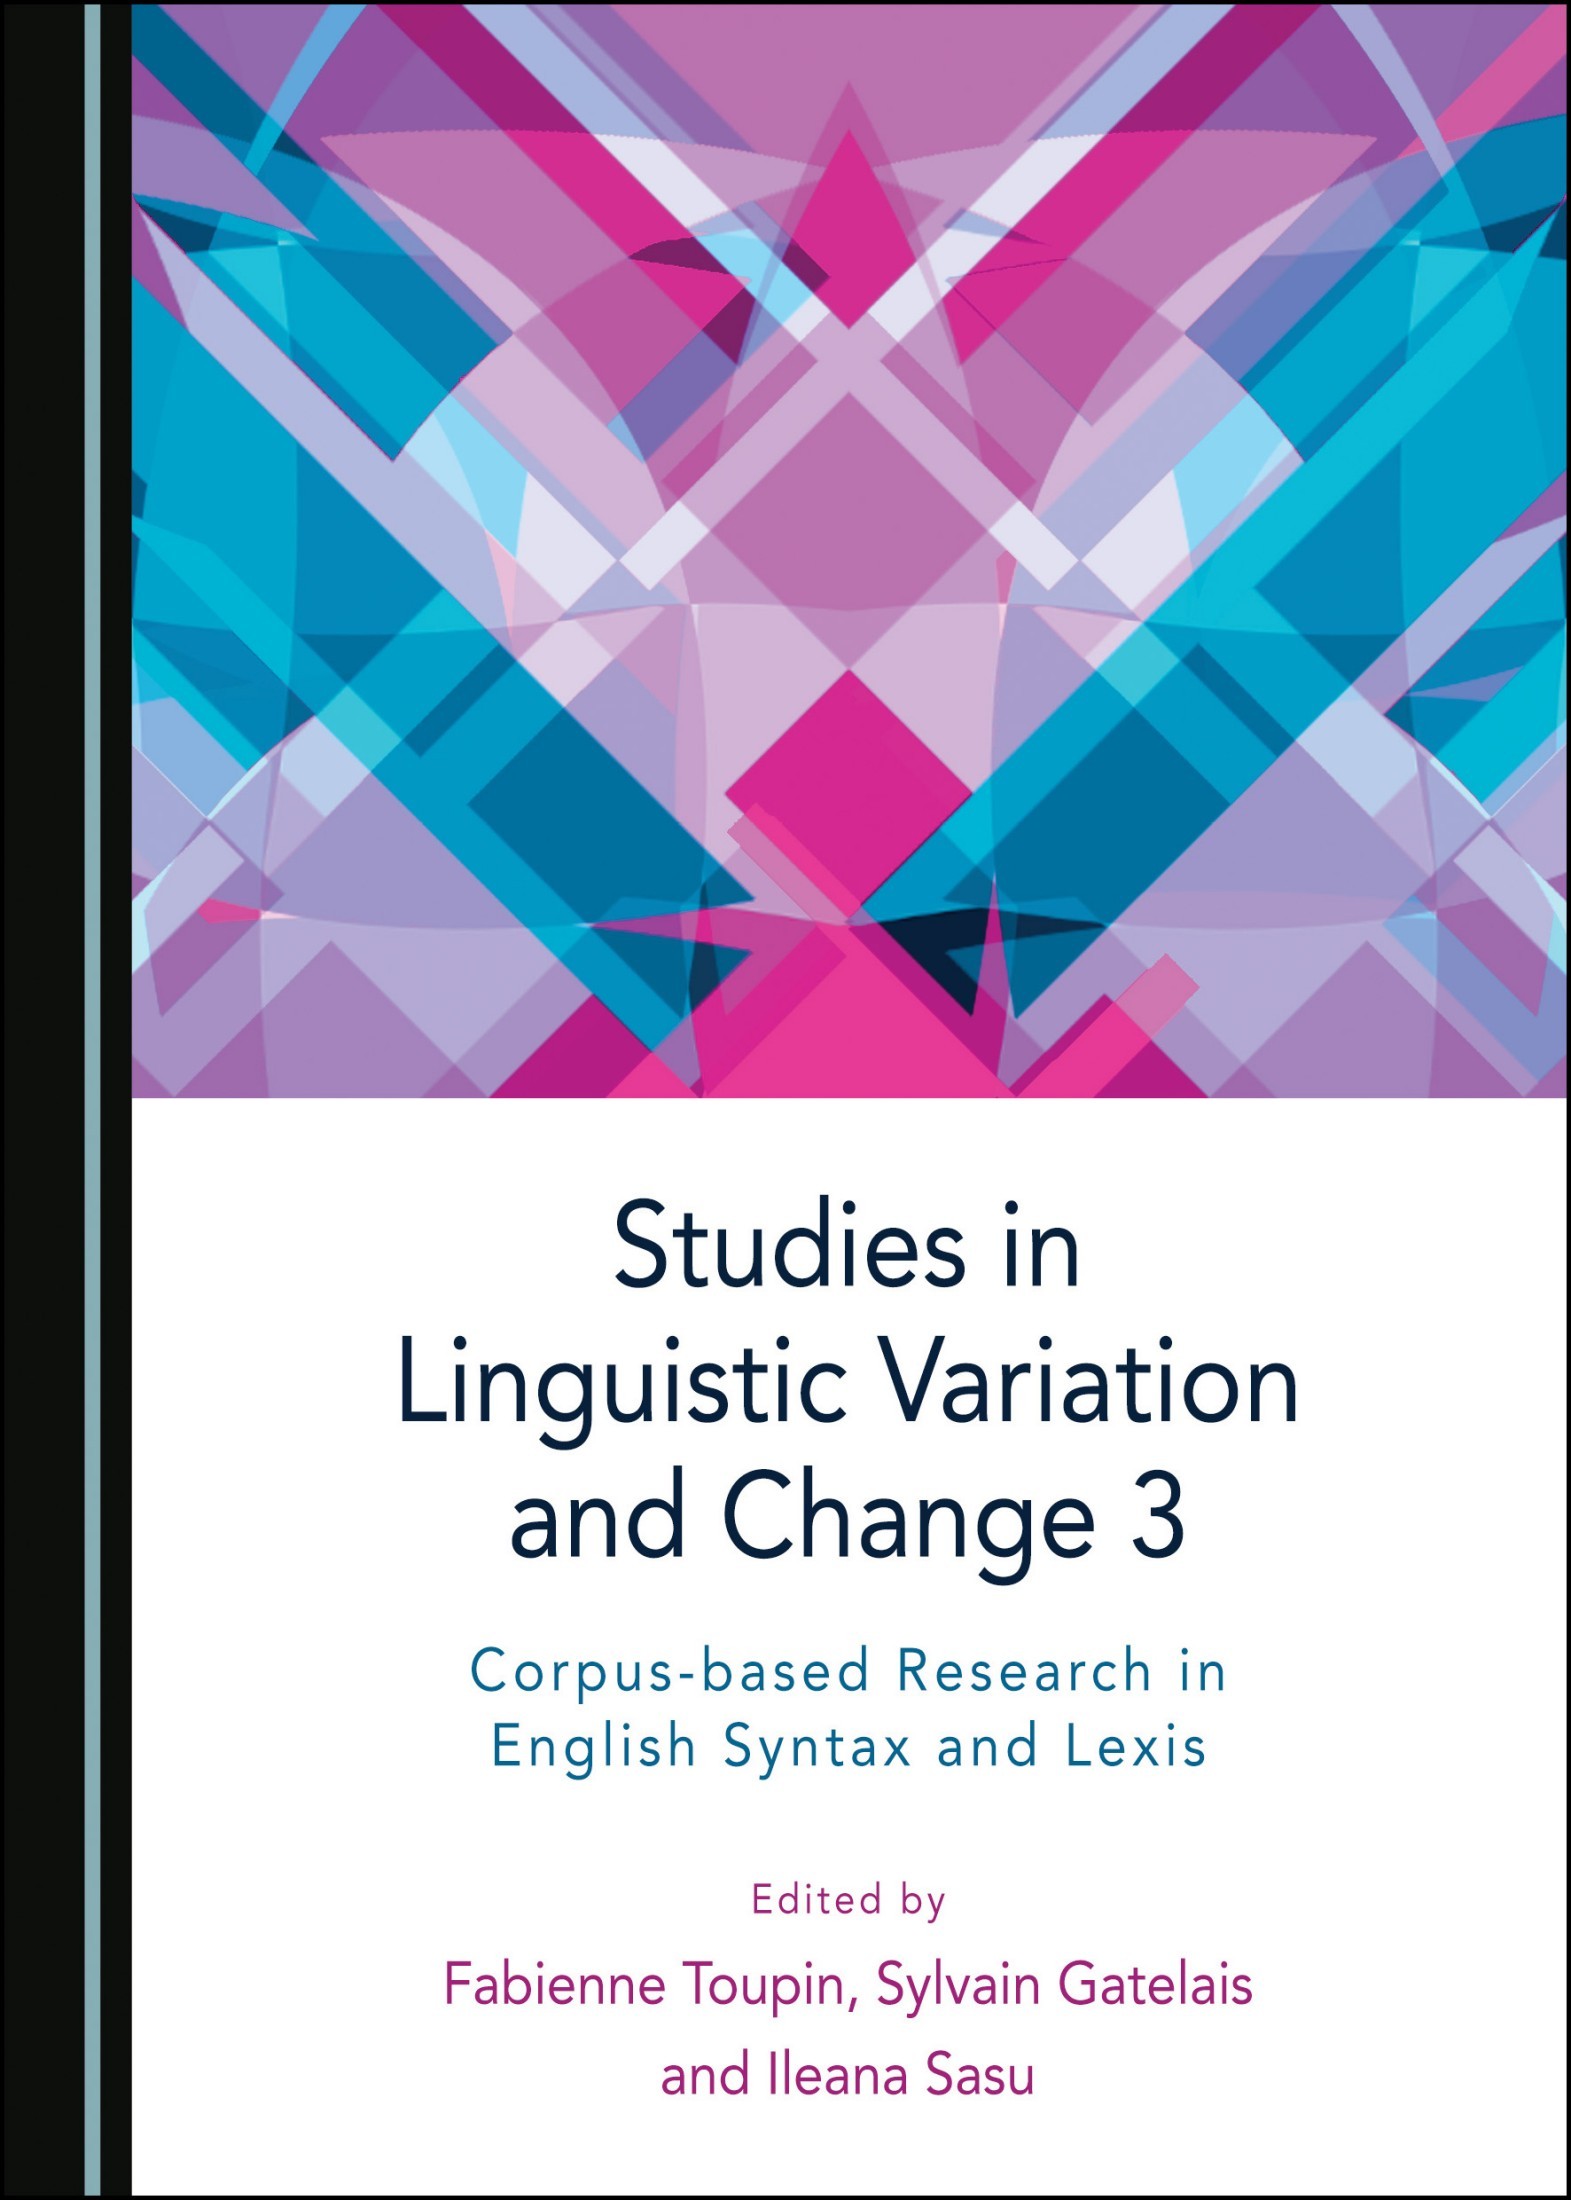 Studies in Linguistic Variation and Change 3: Corpus-Driven Research in English Syntax and Lexis